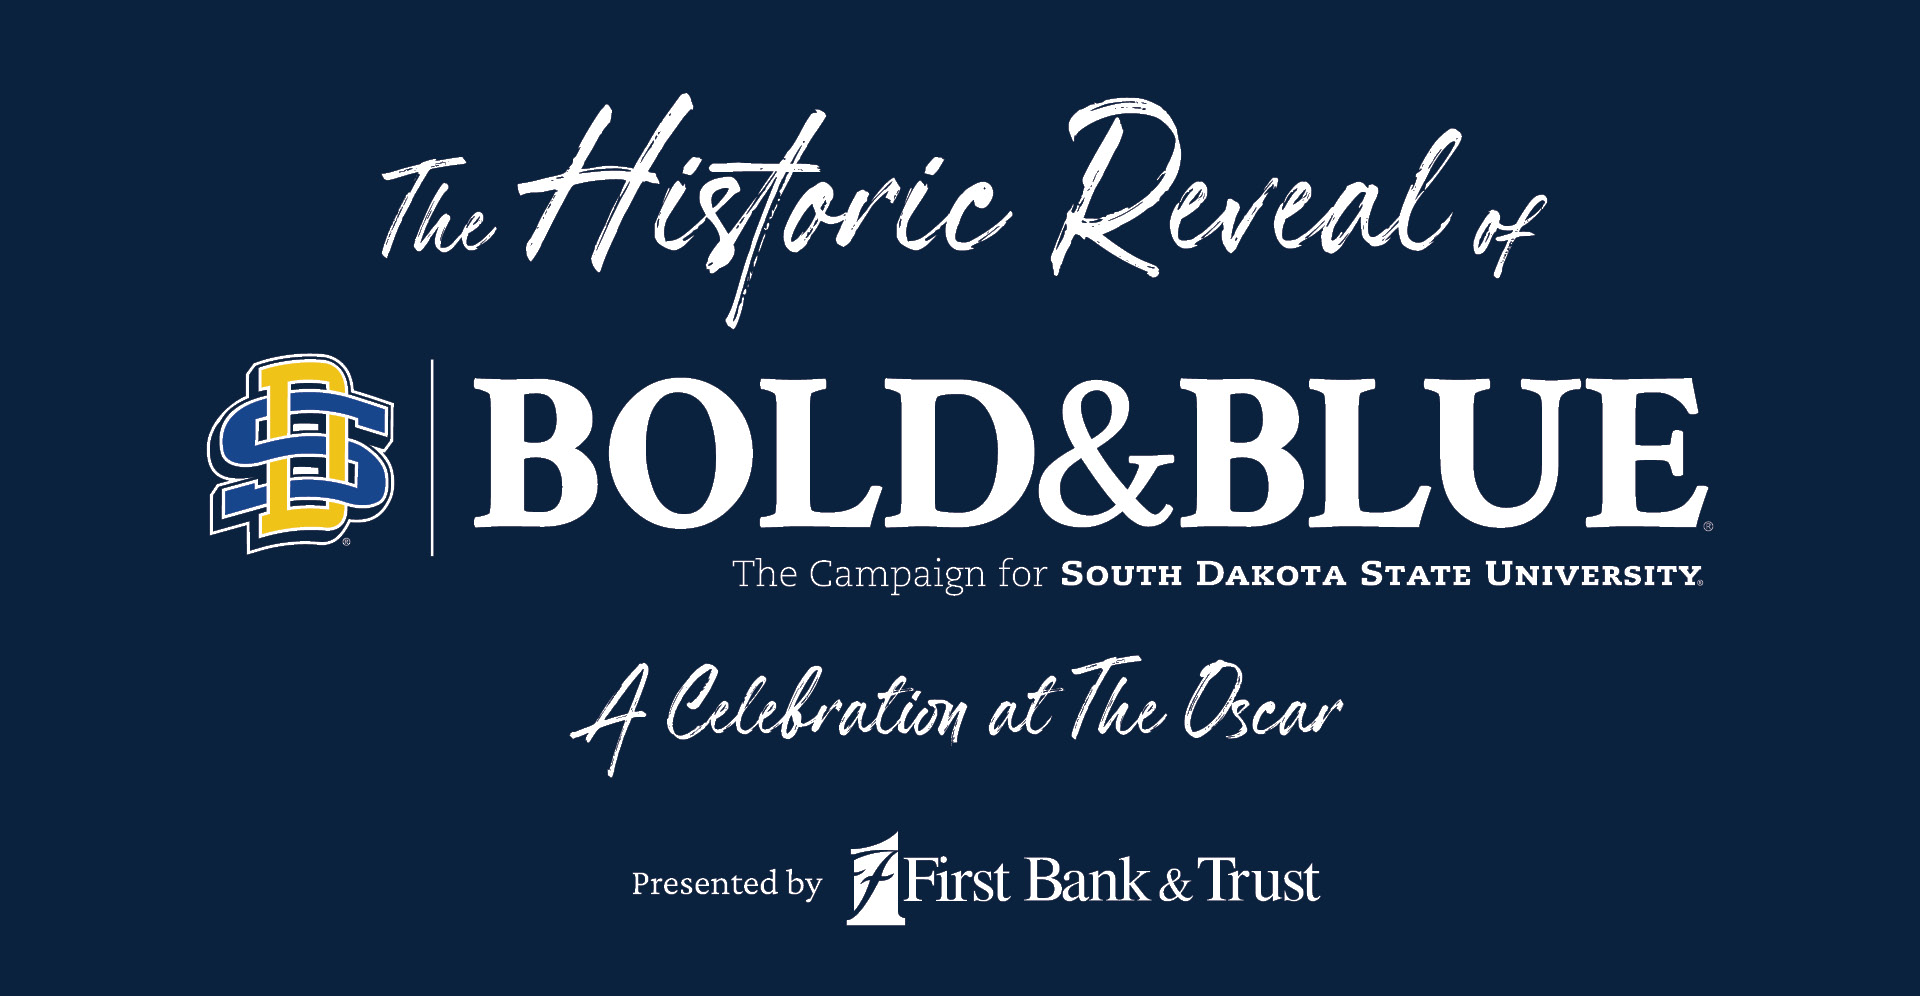 The Historic Reveal of Bold & Blue: A Celebration at The Oscar